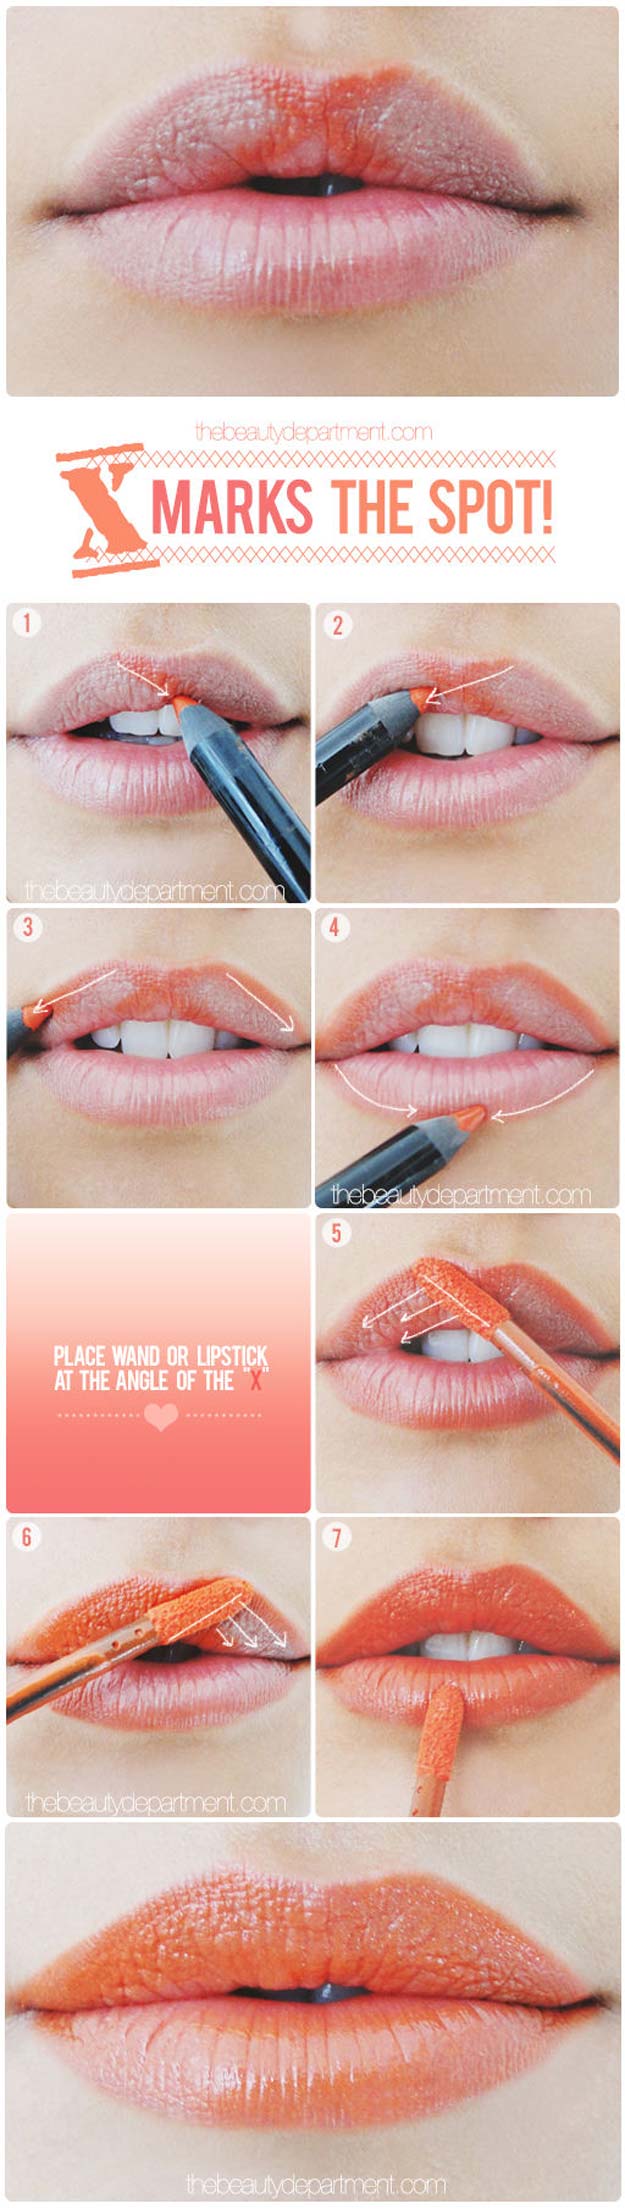 Best Makeup Tutorials for Teens -A Little Lip Trick - Easy Makeup Ideas for Beginners - Step by Step Tutorials for Foundation, Eye Shadow, Lipstick, Cheeks, Contour, Eyebrows and Eyes - Awesome Makeup Hacks and Tips for Simple DIY Beauty - Day and Evening Looks http://diyprojectsforteens.com/makeup-tutorials-teens 